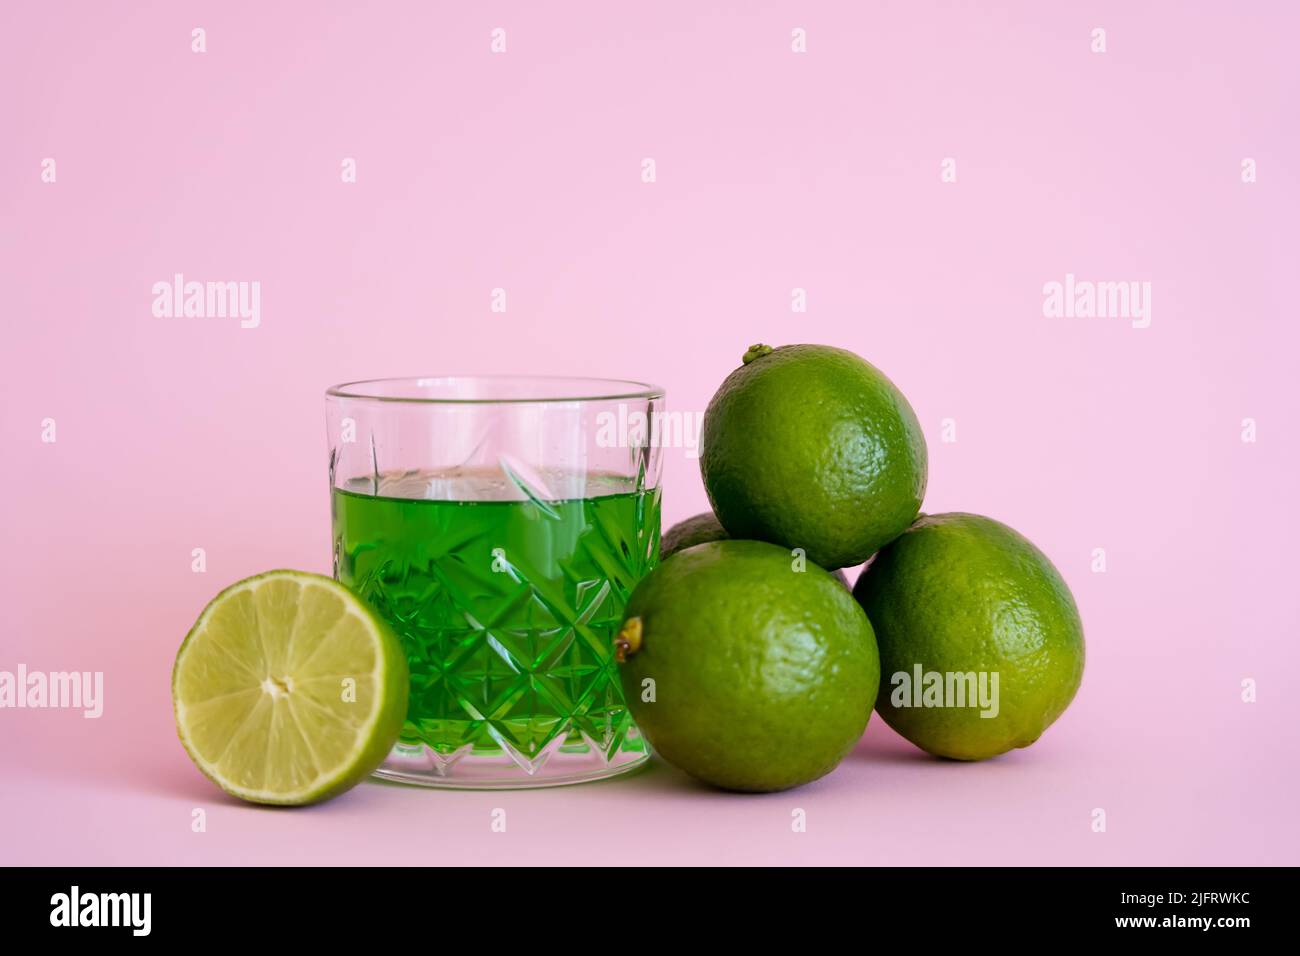 green liquid in glass near fresh limes on pink background Stock Photo